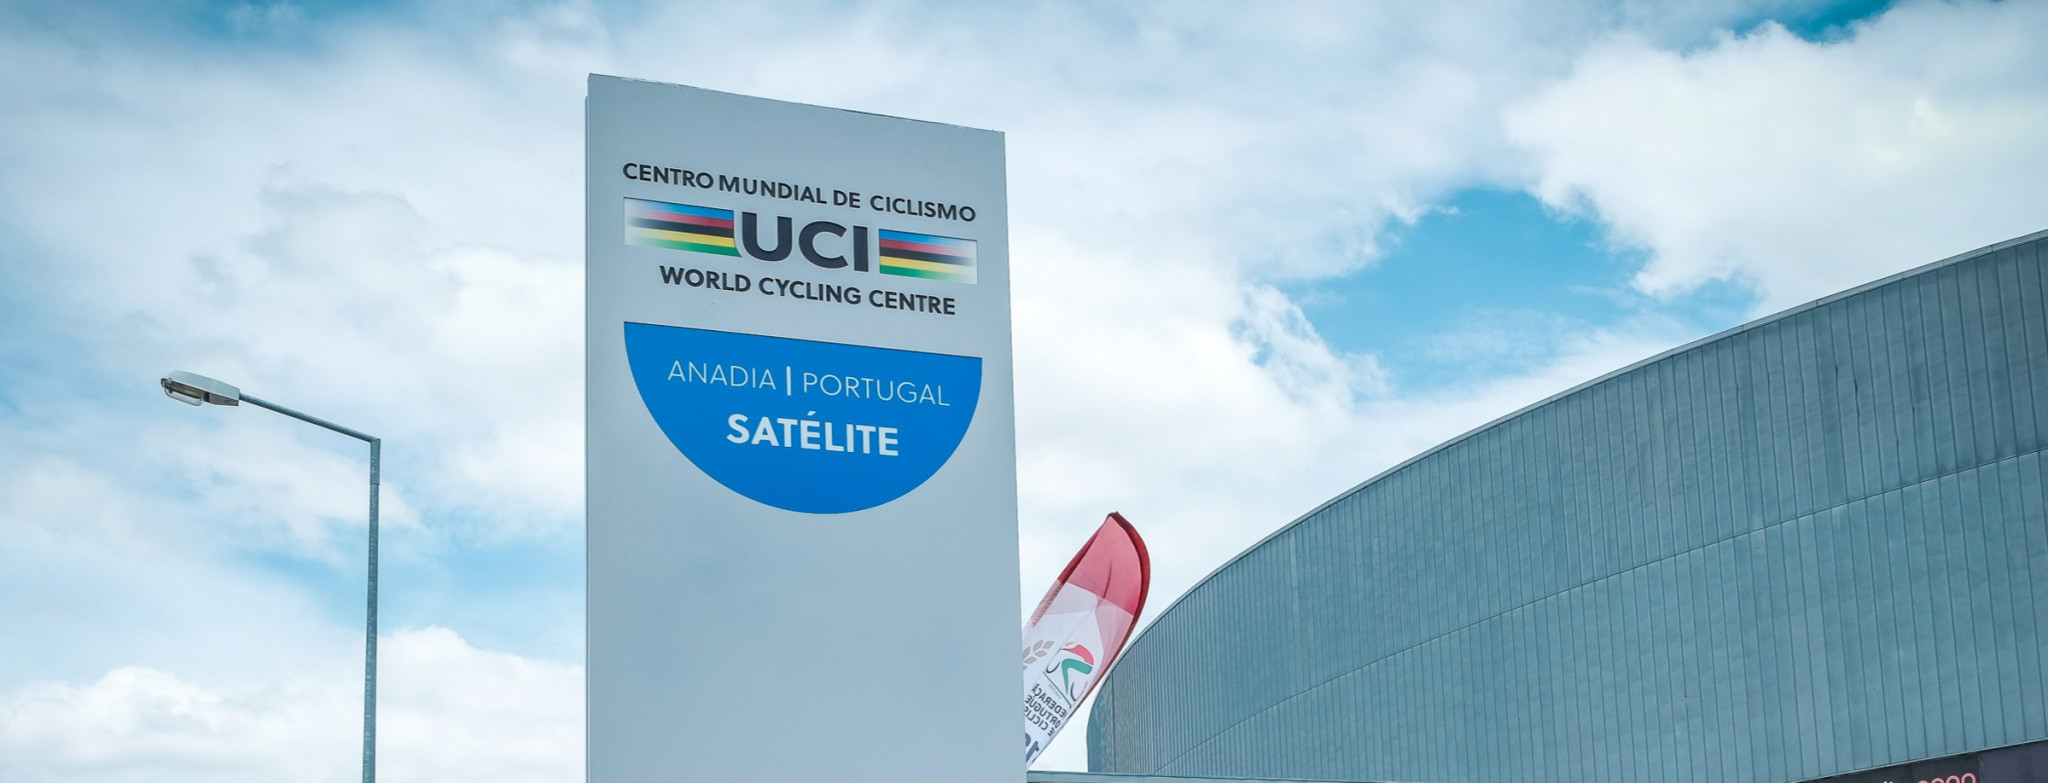 New two-tier system to be introduced for UCI World Cycling Centre 